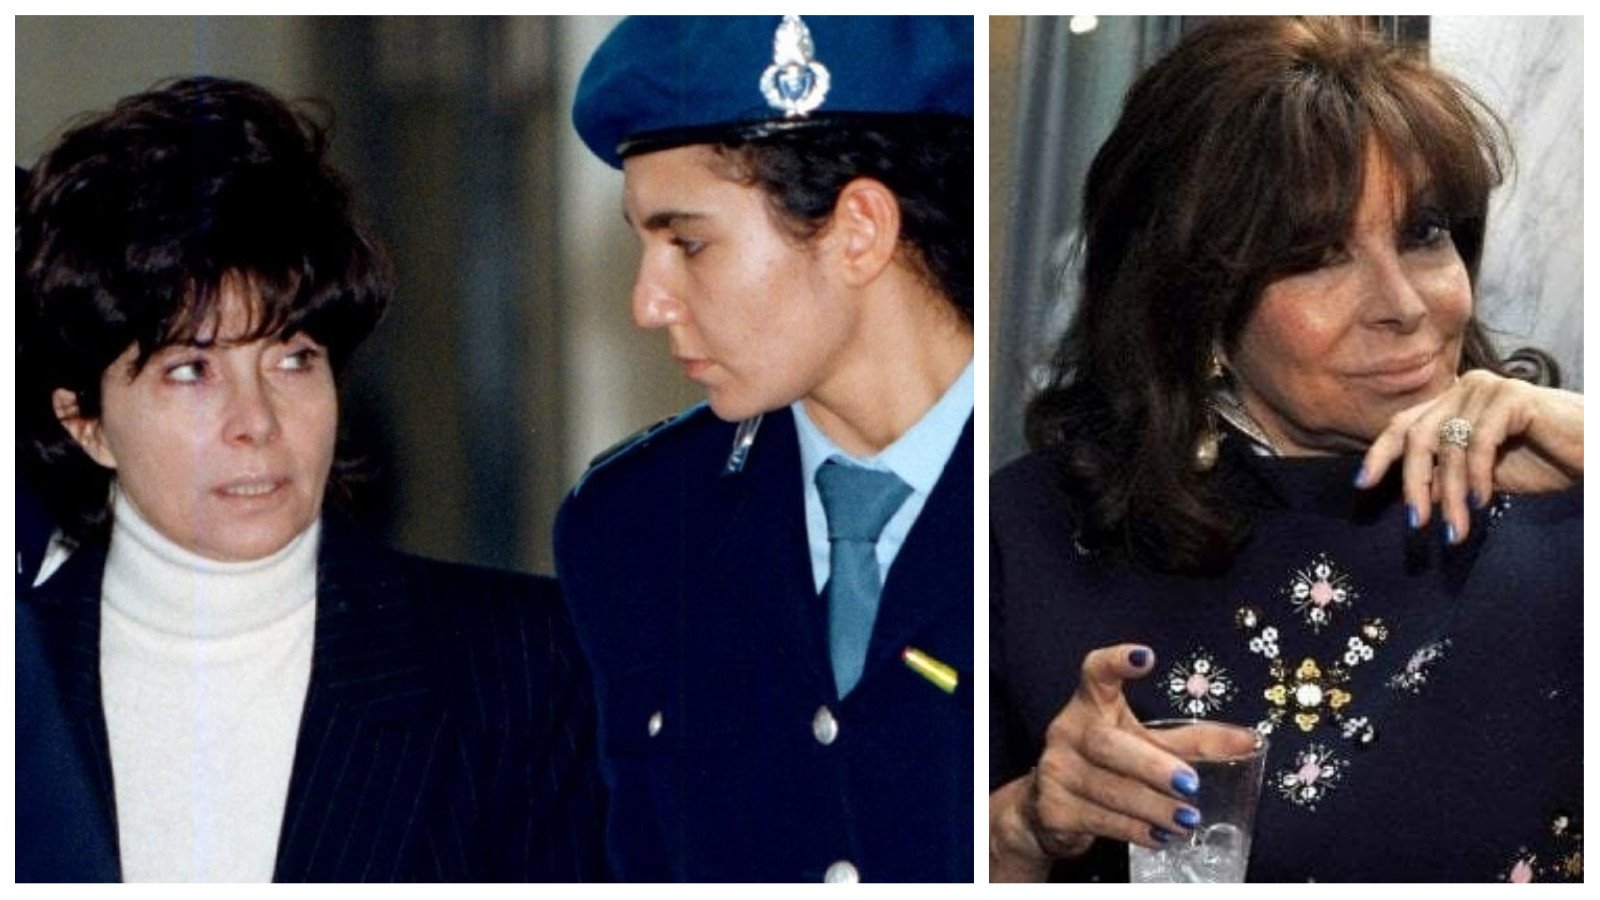 Italy's 'Black Widow' Gucci heiress who ordered ex-husband's murder  entitled to nearly £1 million a year from his estate